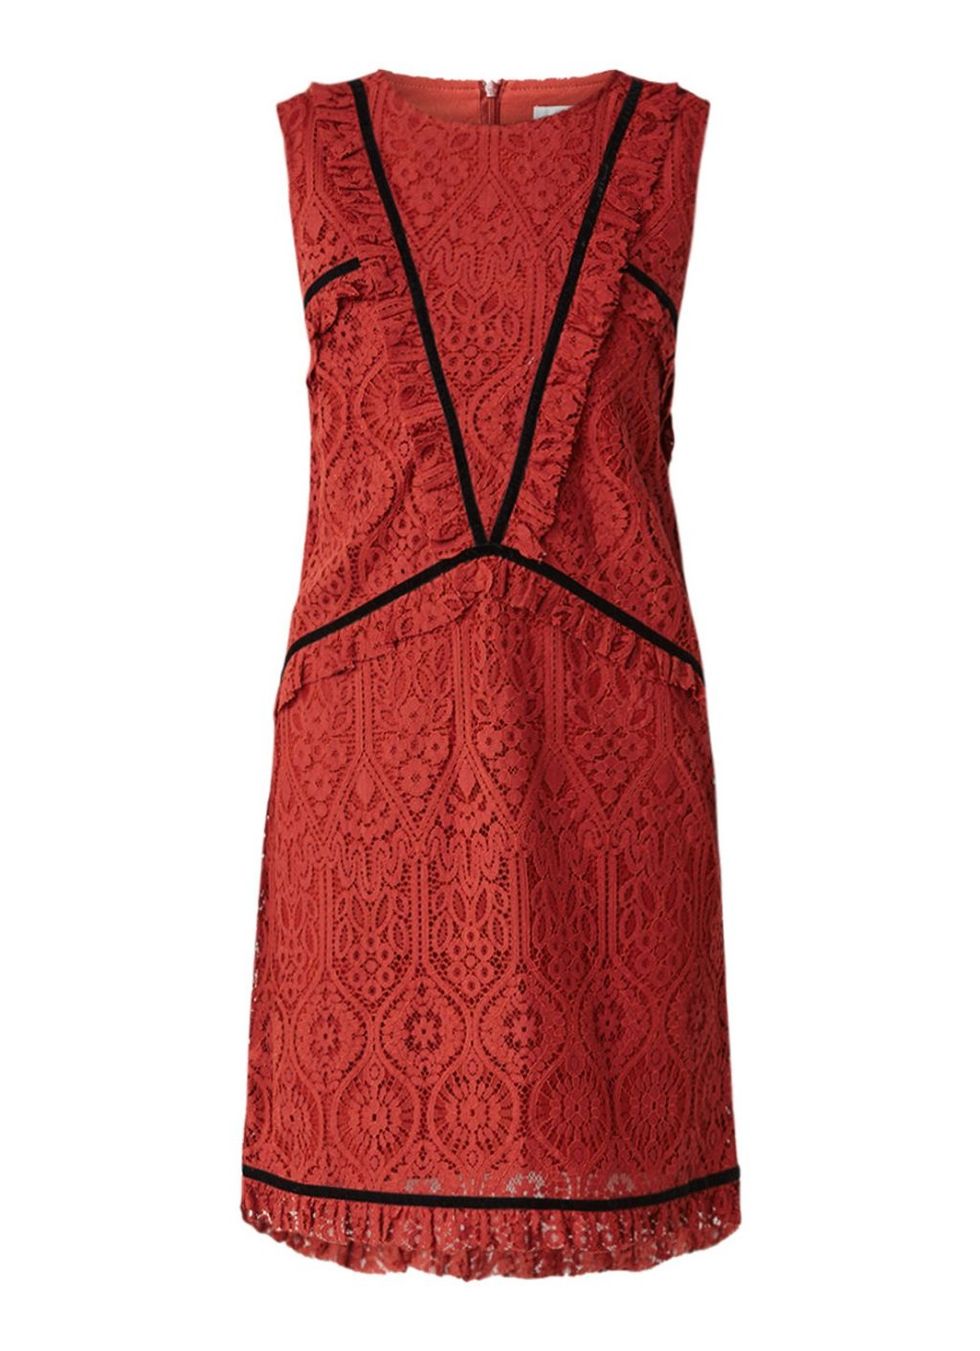 Clothing, Dress, Day dress, Red, Cocktail dress, Maroon, A-line, Sleeveless shirt, Pattern, Lace, 